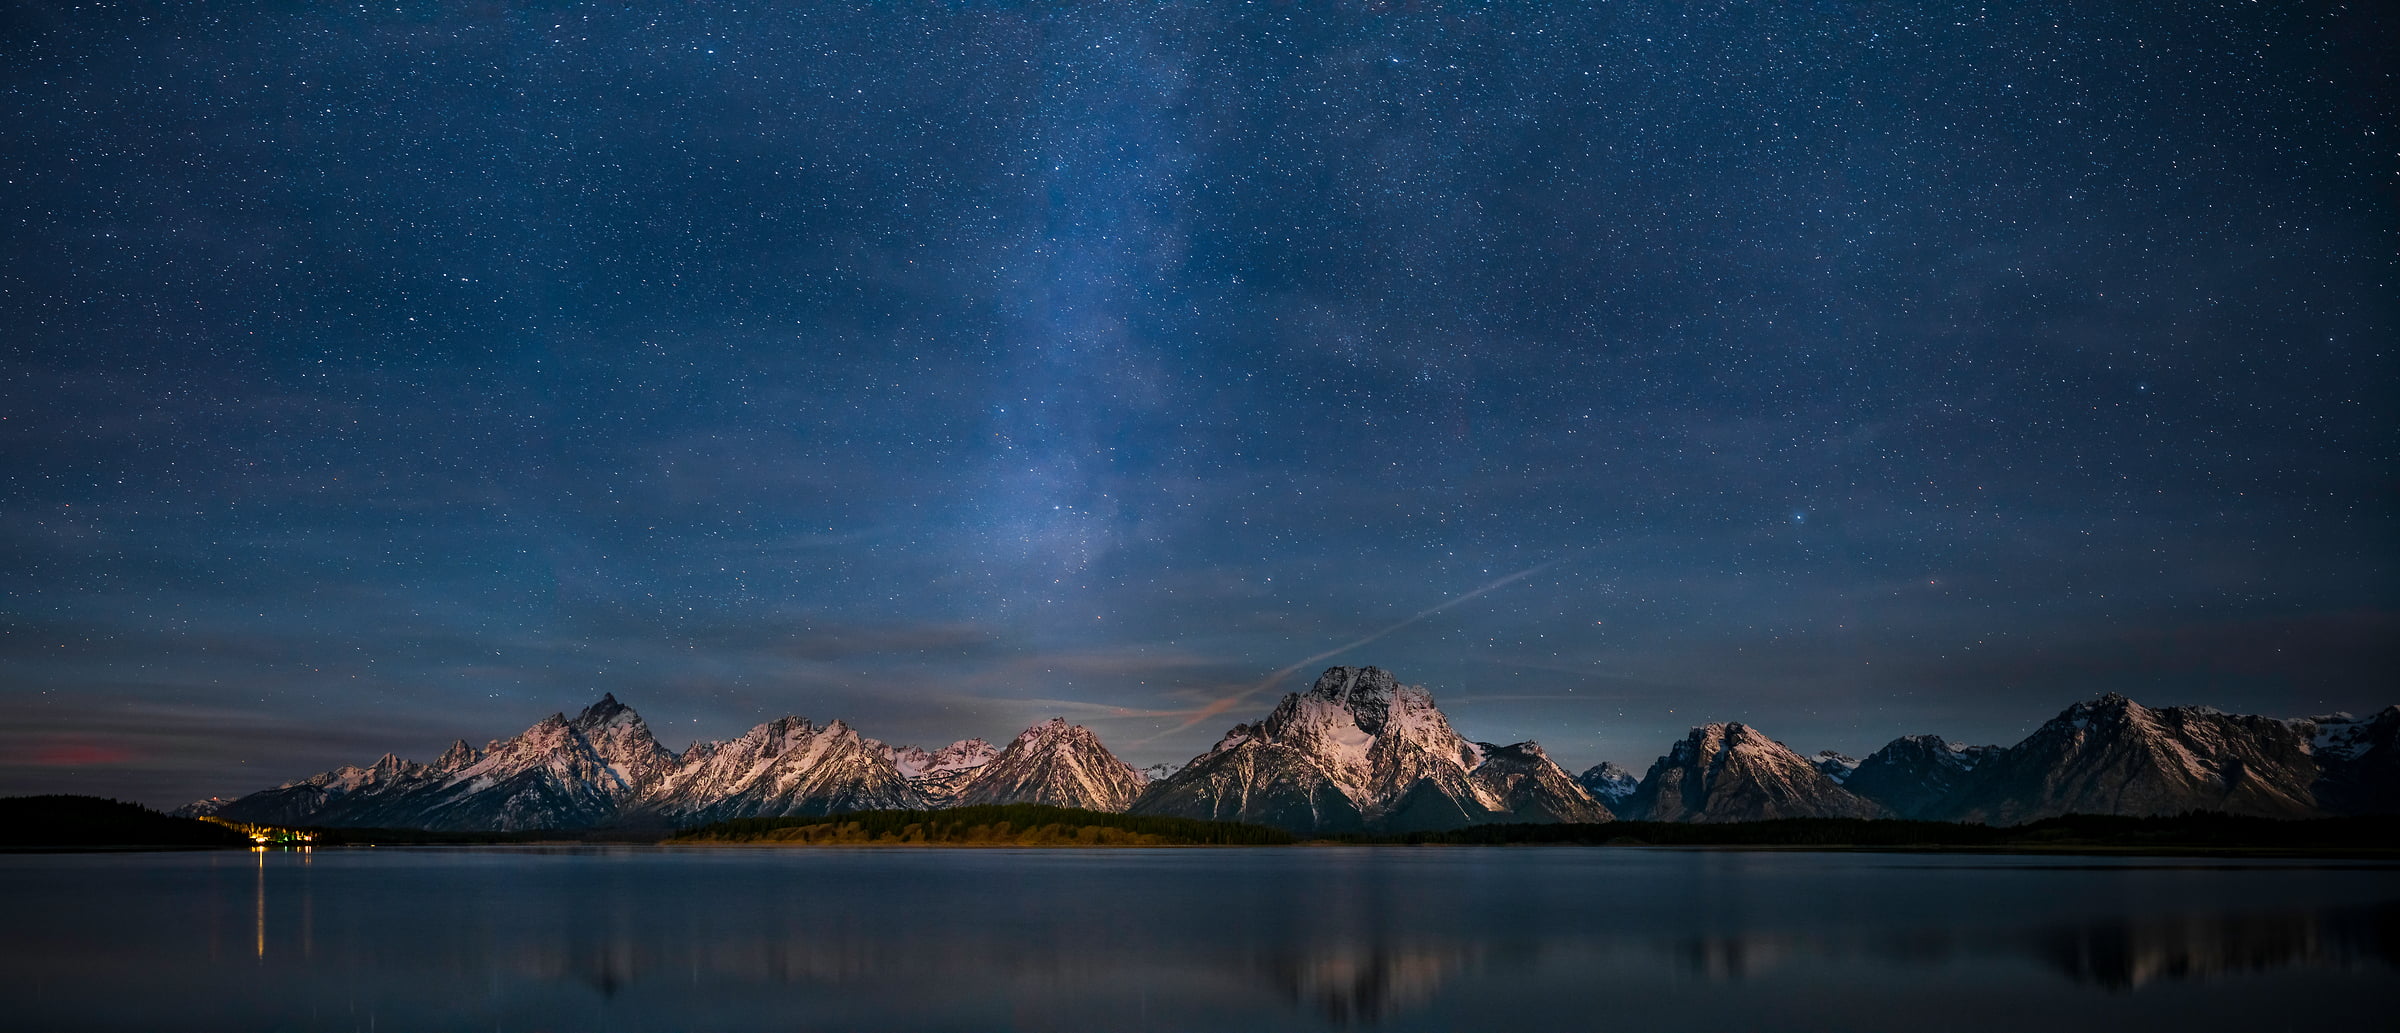 102 megapixels! A very high resolution, large-format VAST photo print of the Rocky Mountains at night with stars and the Milky Way; astrophotograph created by Justin Katz in Grand Teton National Park, Wyoming.